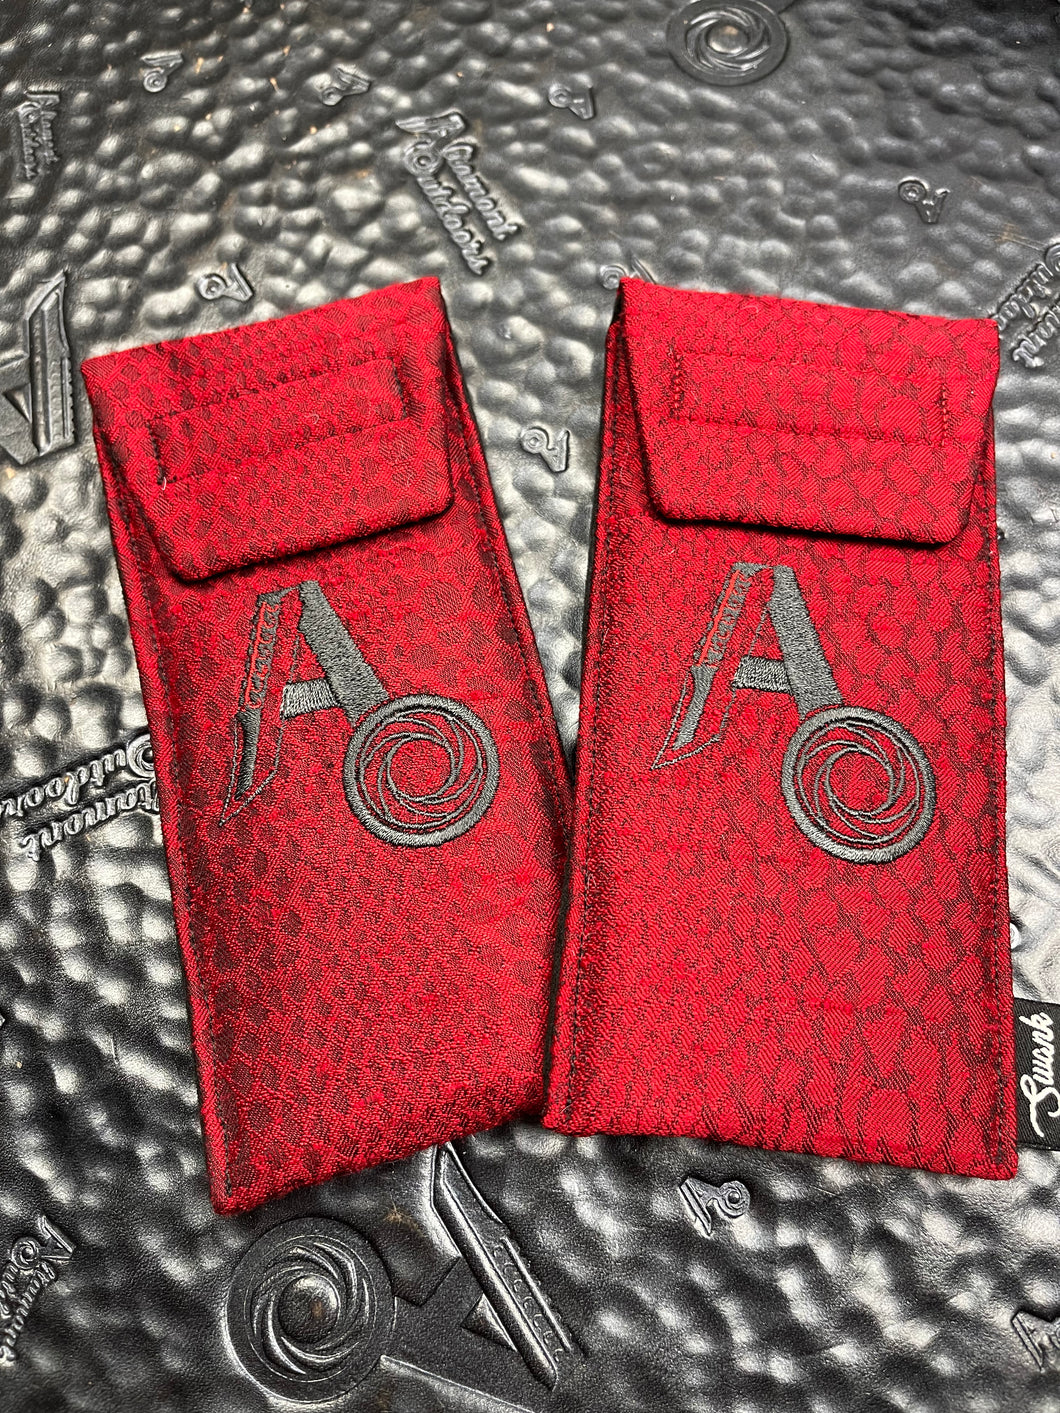 AO Gear Knife Pouch Swank Hank Collaboration RED